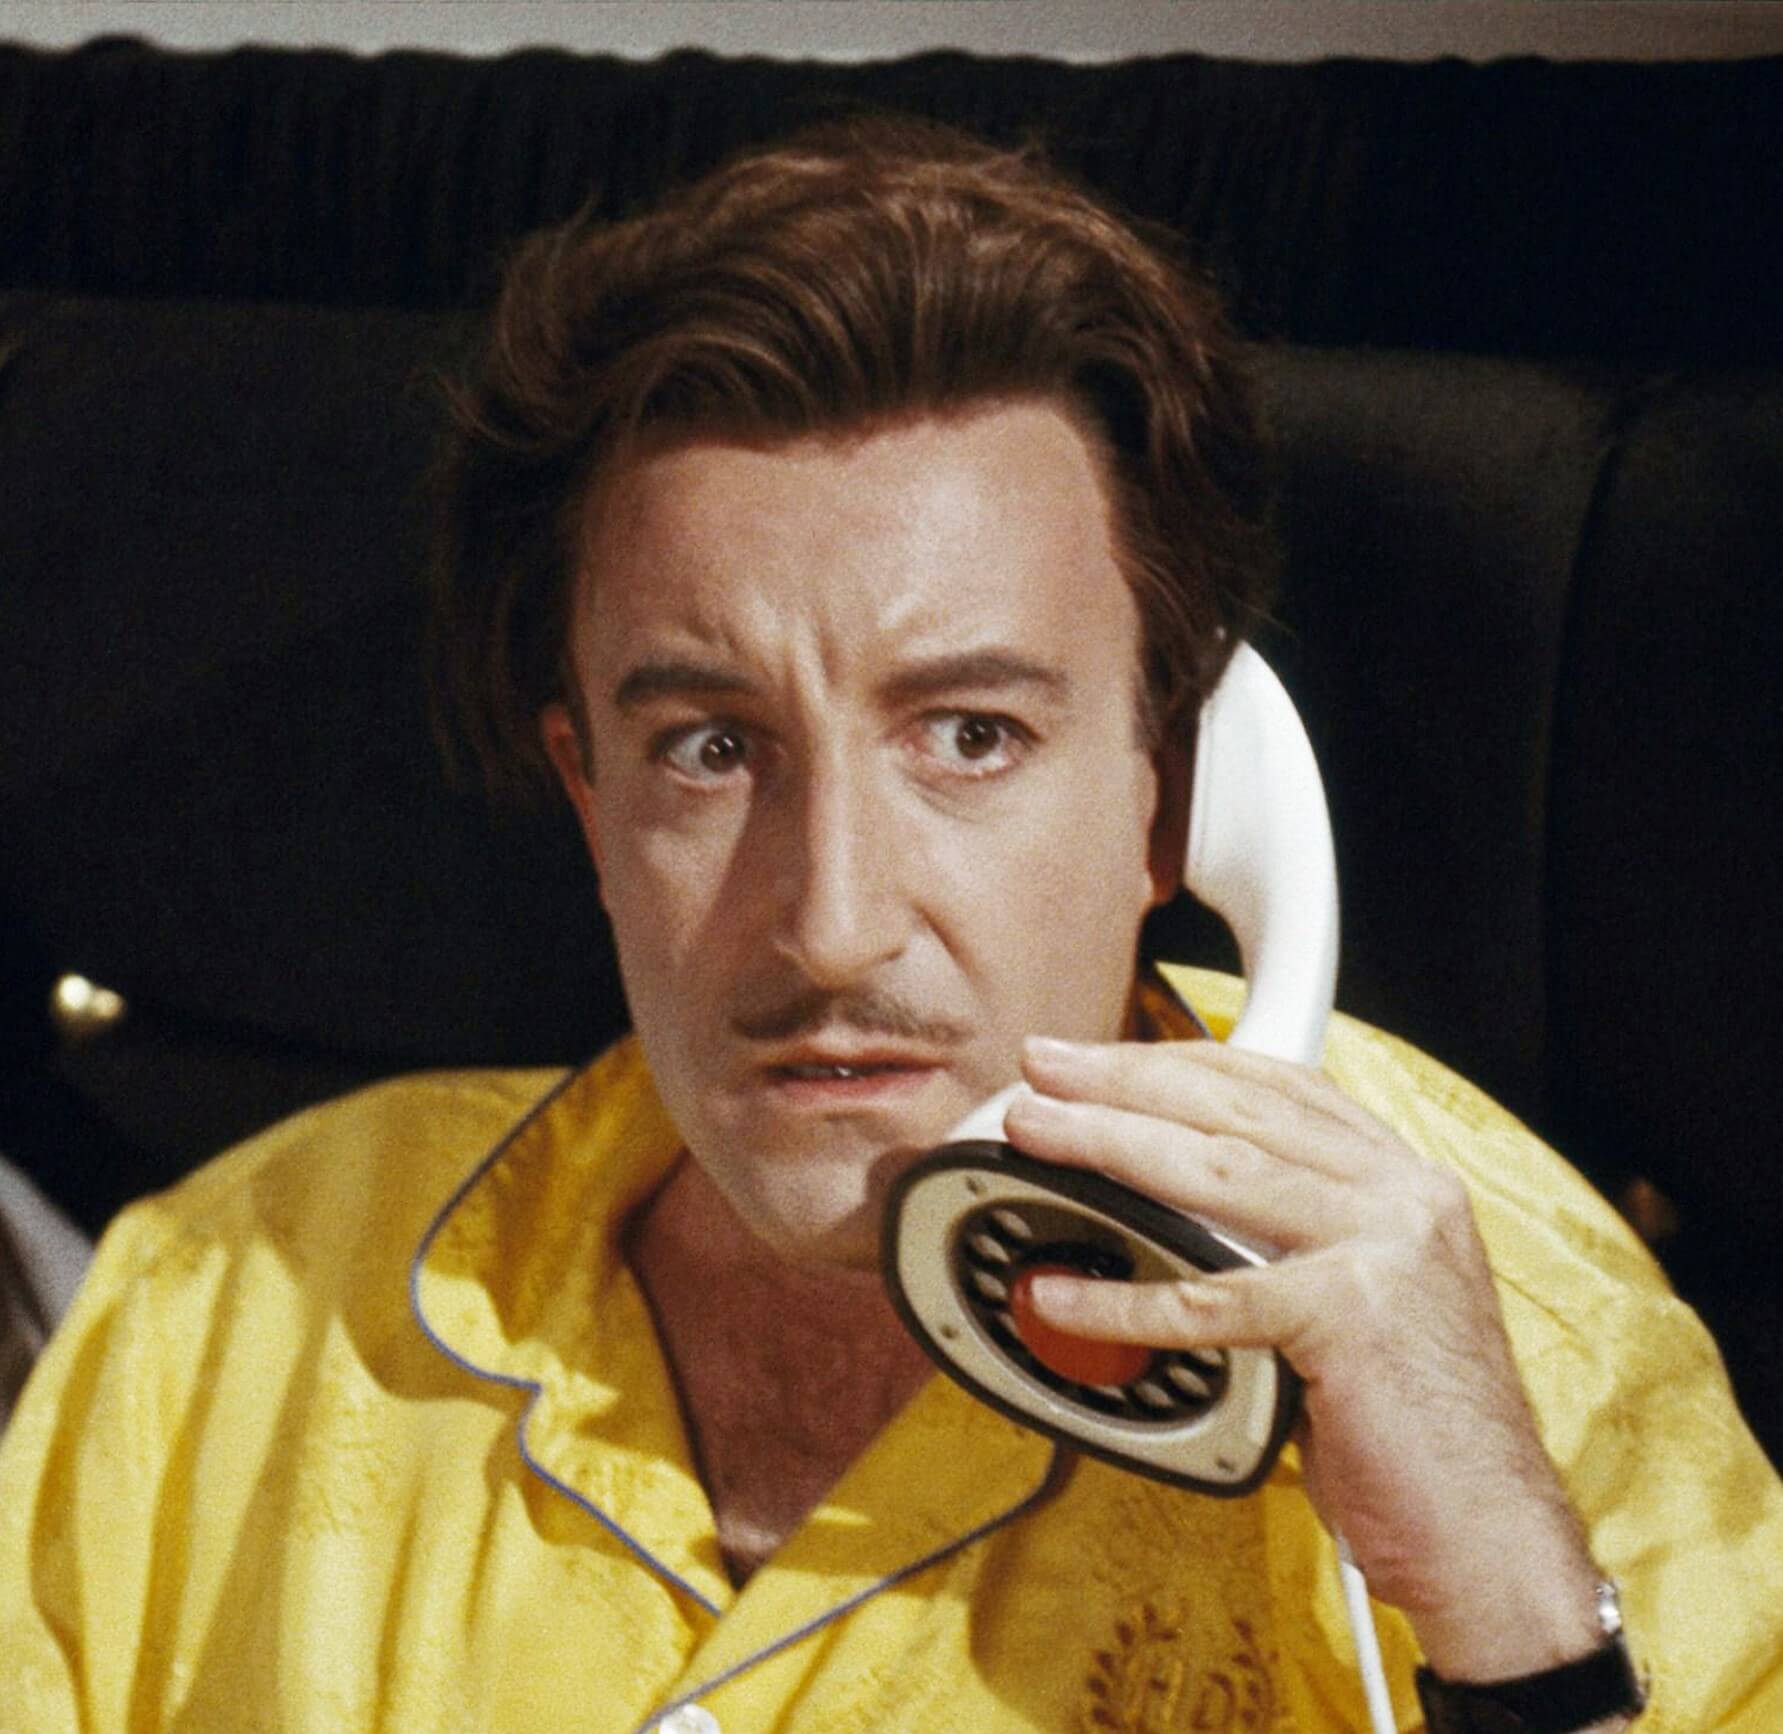 Peter Sellers holding a phone in the movie 'The World of Henry Orient'